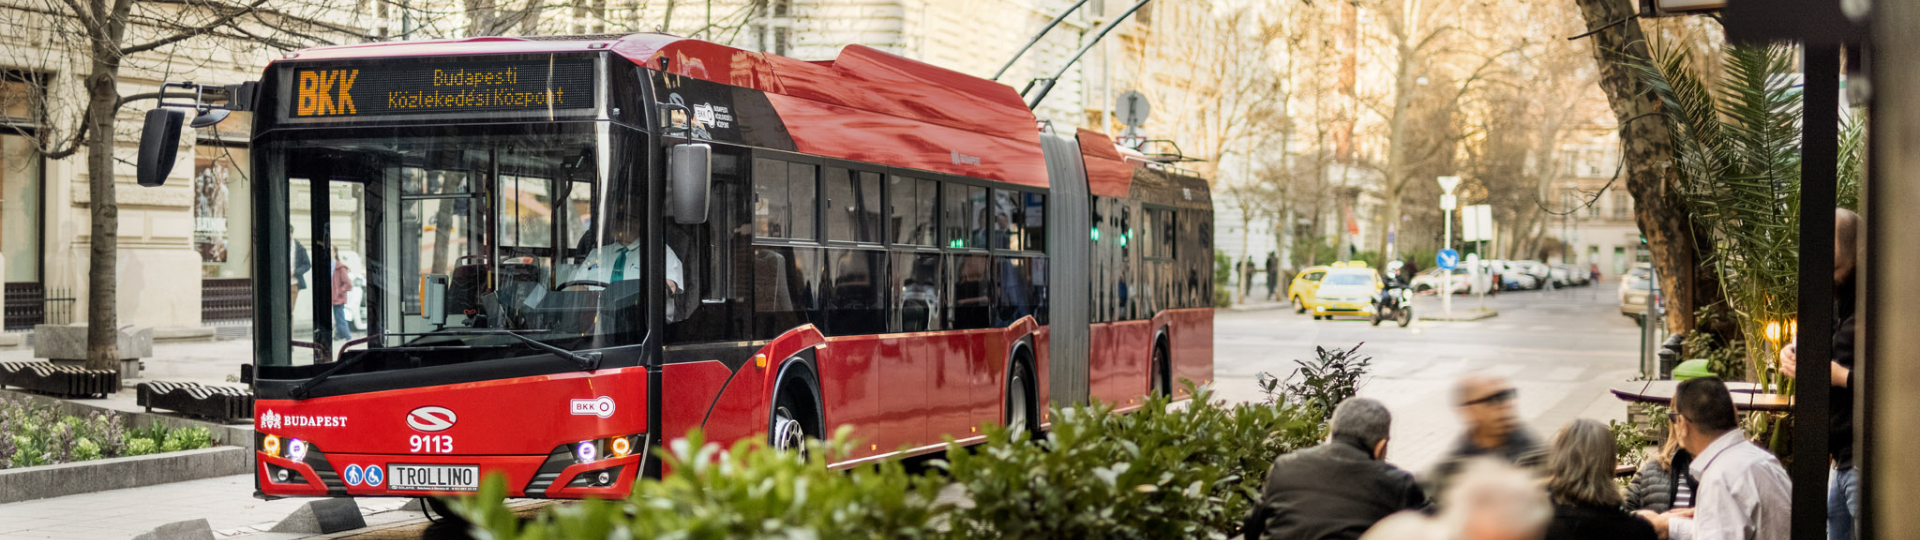 Solaris on the shortlist of suppliers to provide zero-emission buses to France